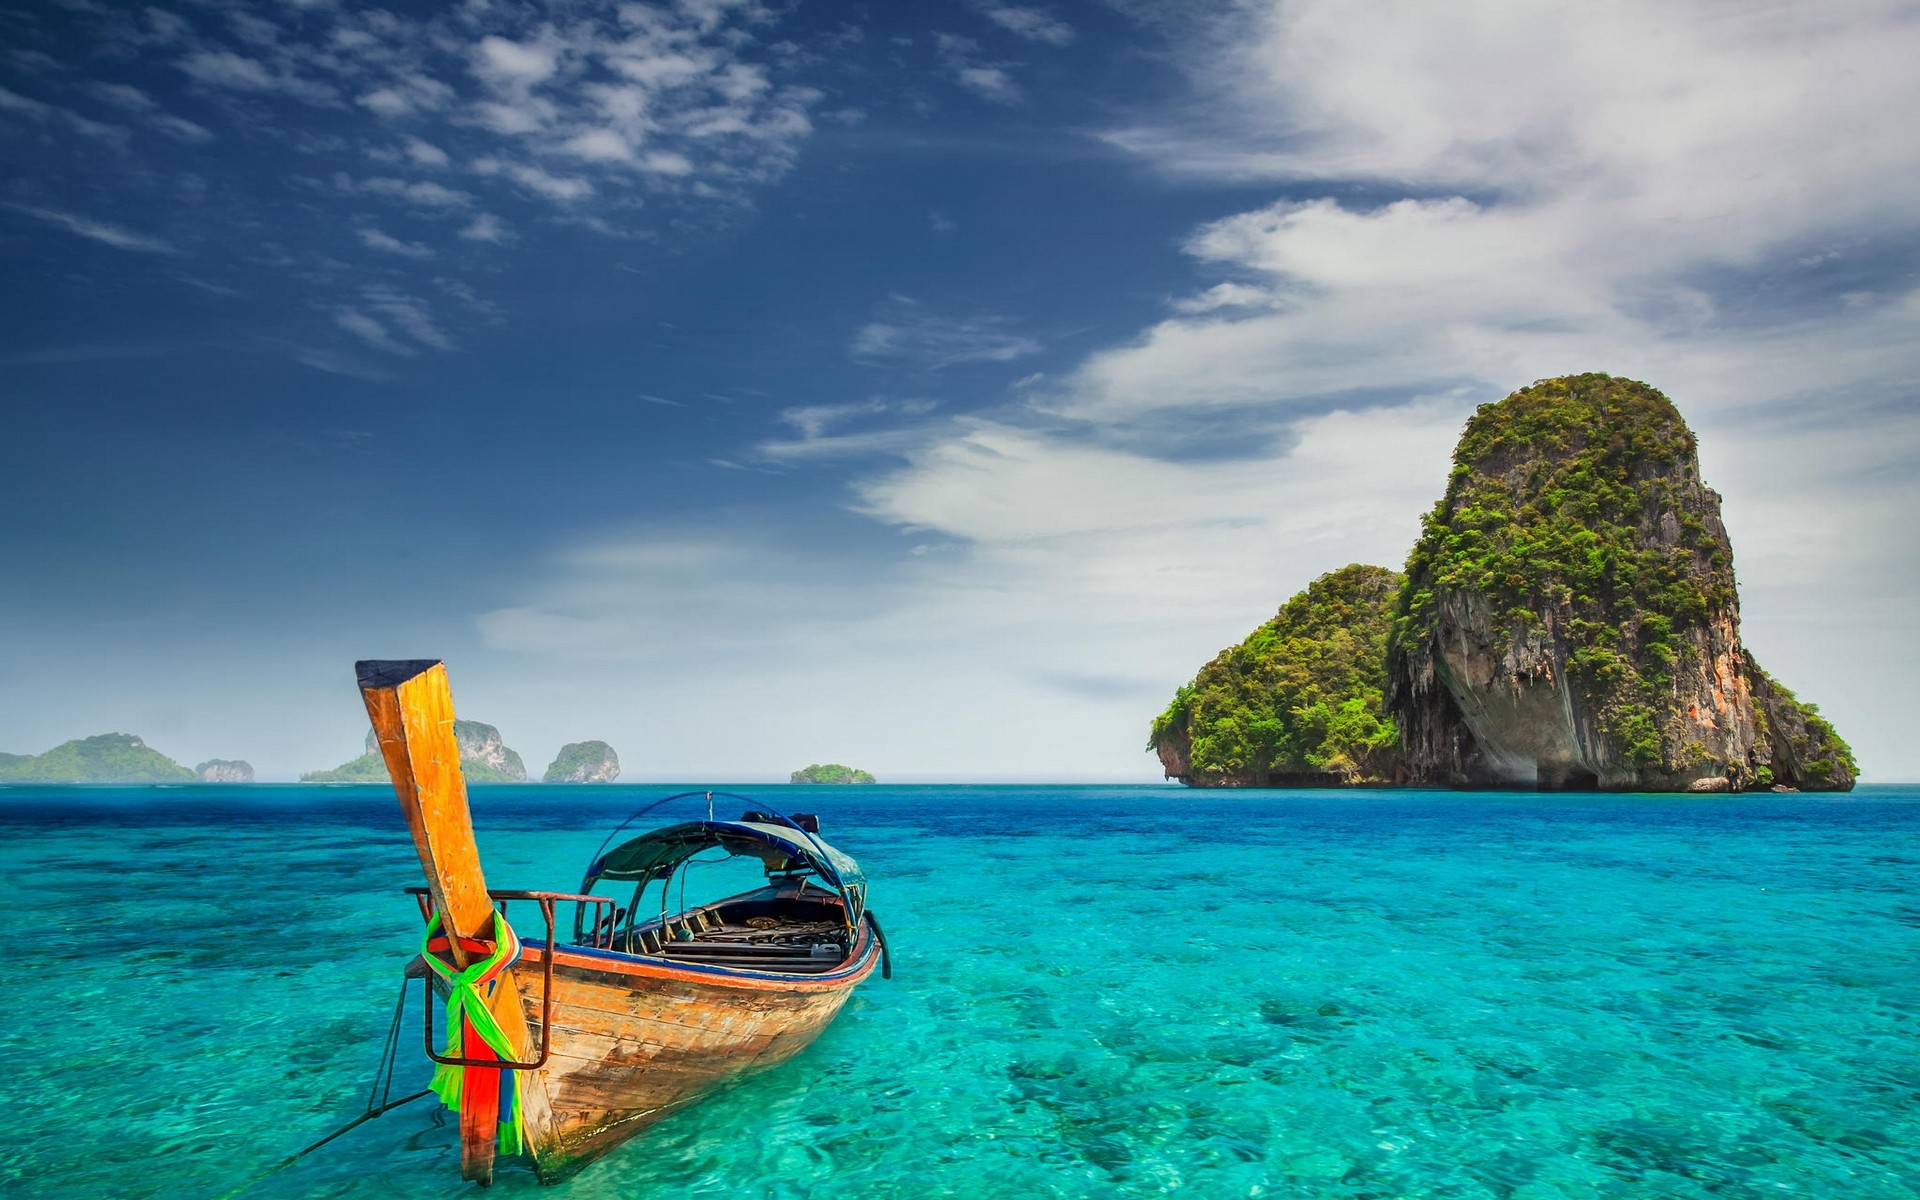 General 1920x1200 landscape Railay Beach nature Thailand cliff limestone island boat tropical sea turquoise summer clouds Vietnam Asia vehicle